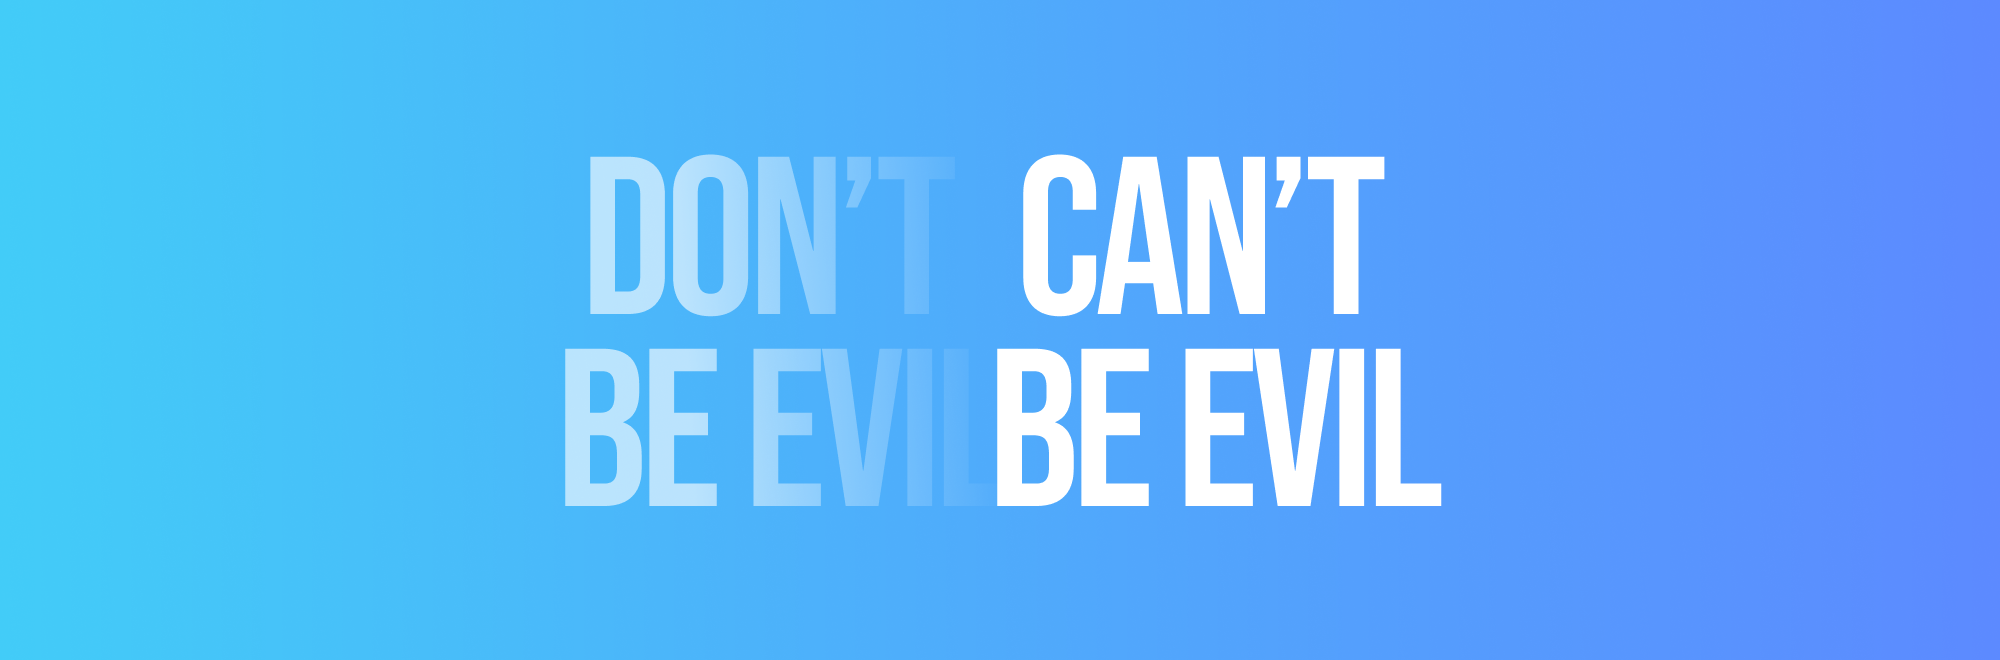 “Don’t be evil” becomes “Can’t be evil”